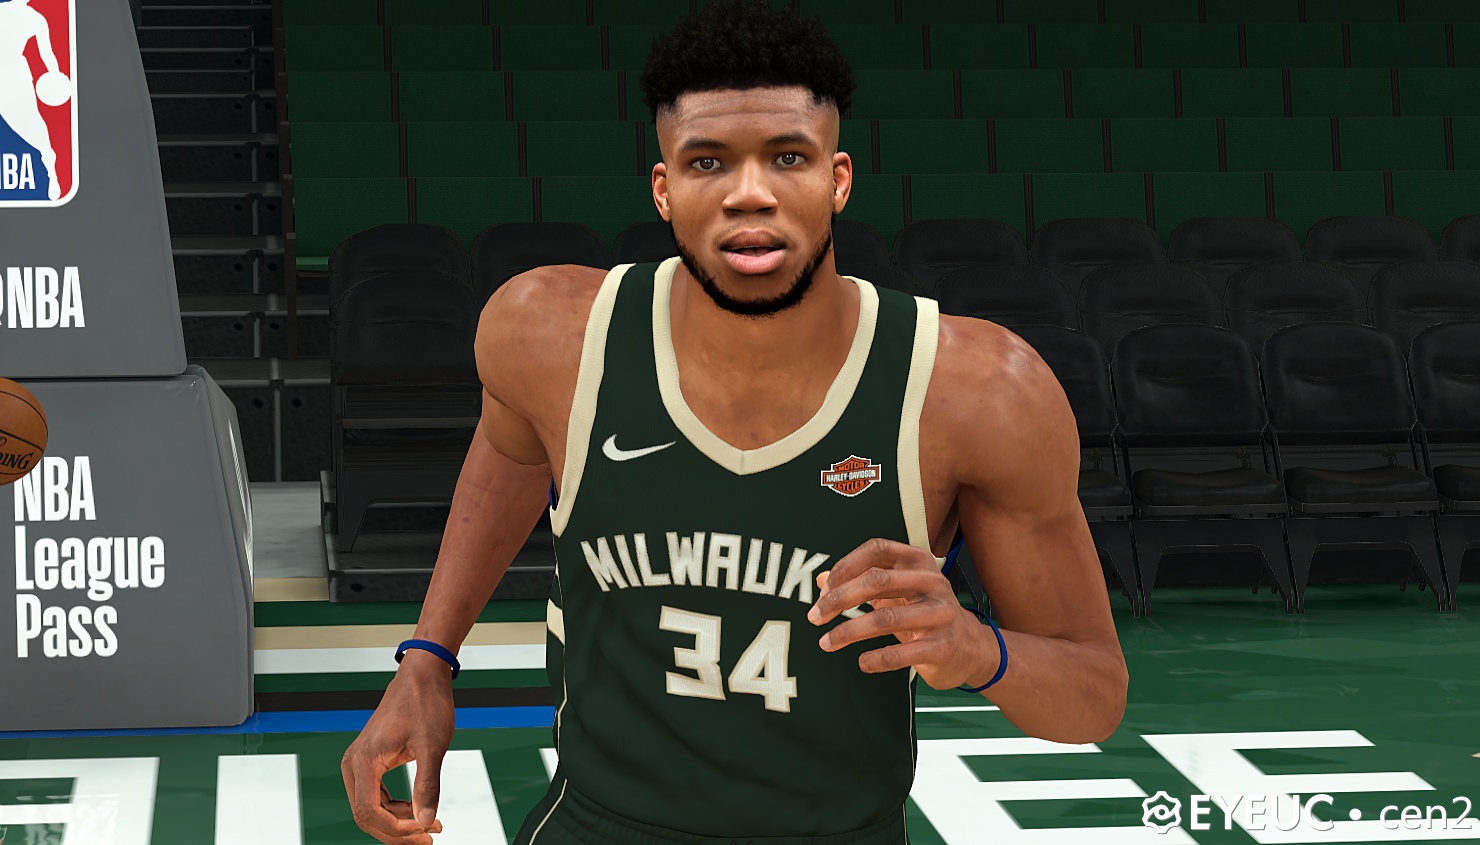 Giannis Antetokounmpo Cyberface and Body Model 3 Versions By Cen2 [FOR 2K21] - 2kspecialist: NBA ...